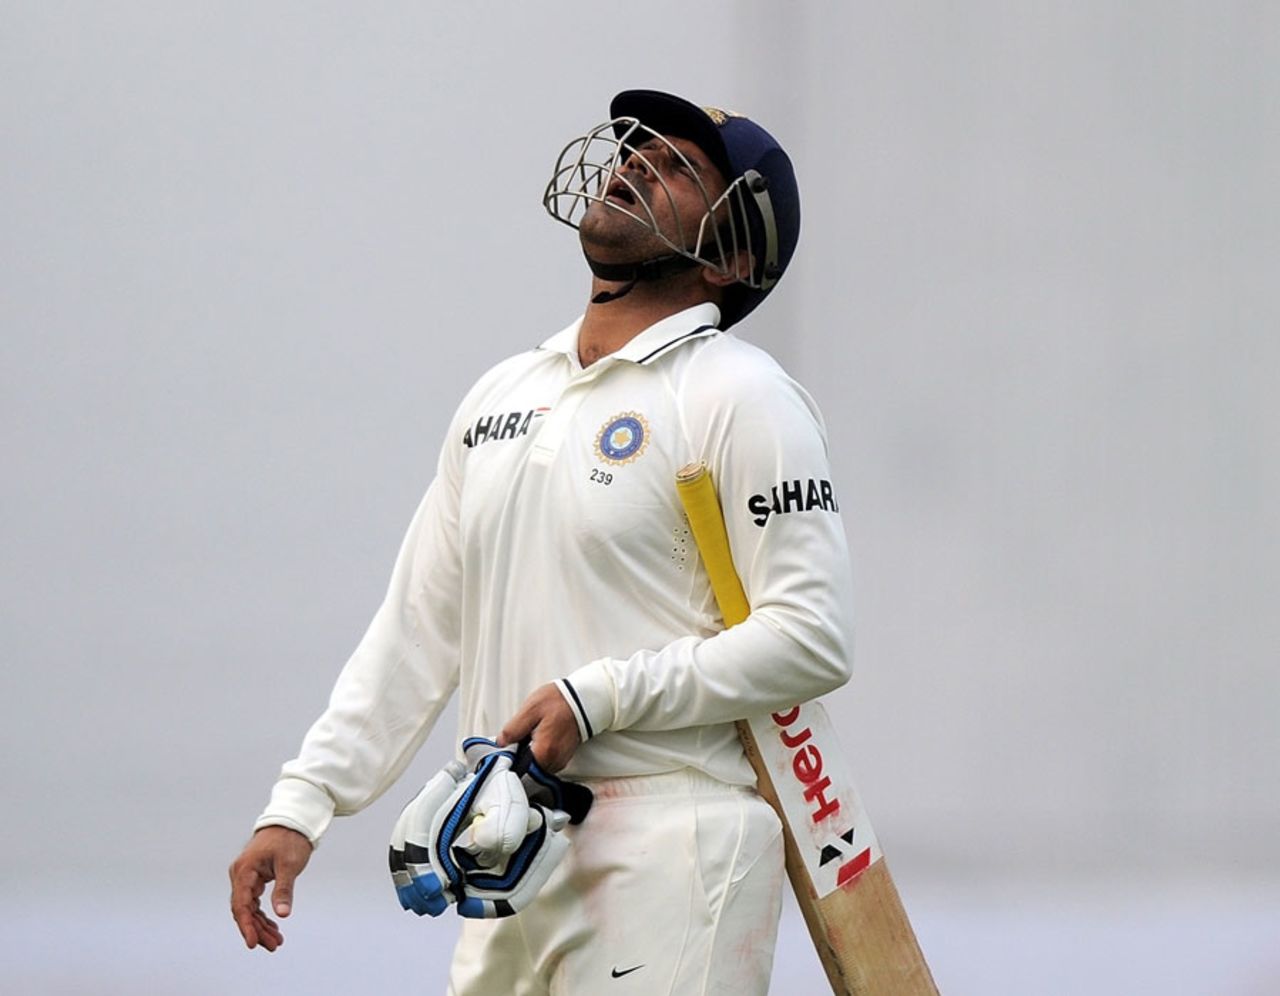 Virender Sehwag reacts to being dismissed for 55, India v West Indies, 1st Test, New Delhi, 3rd day, November 8, 2011